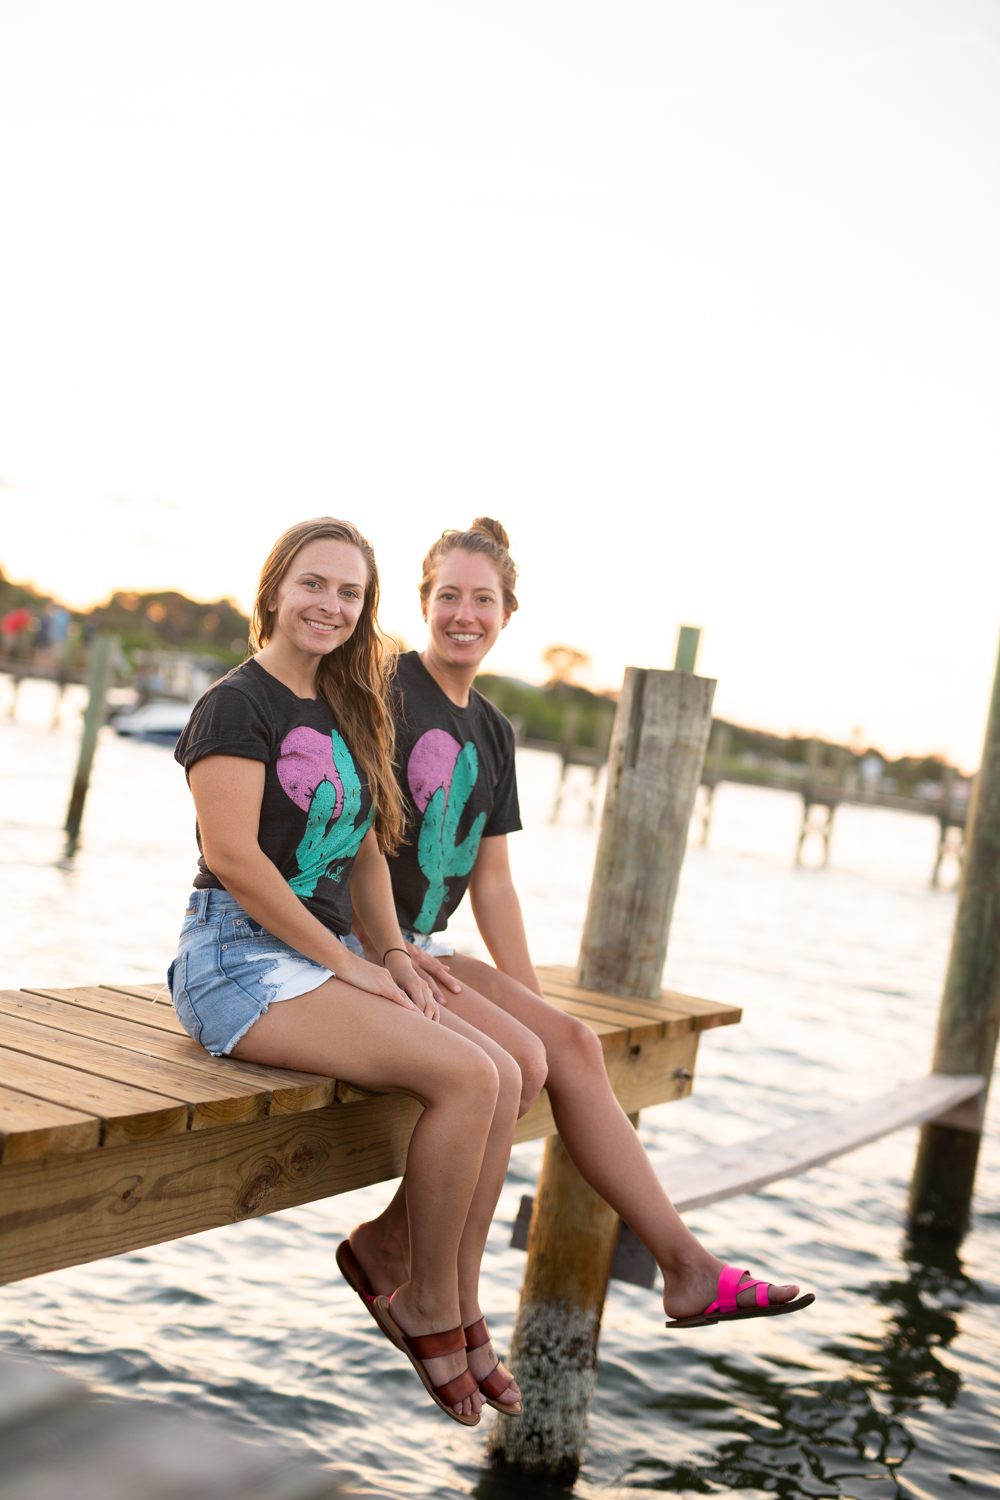 Fun in the Sun with Hello Apparel | Hello Apparel Cactus T-Shirt | Coastal Living | Best Friends - Sunshine Style